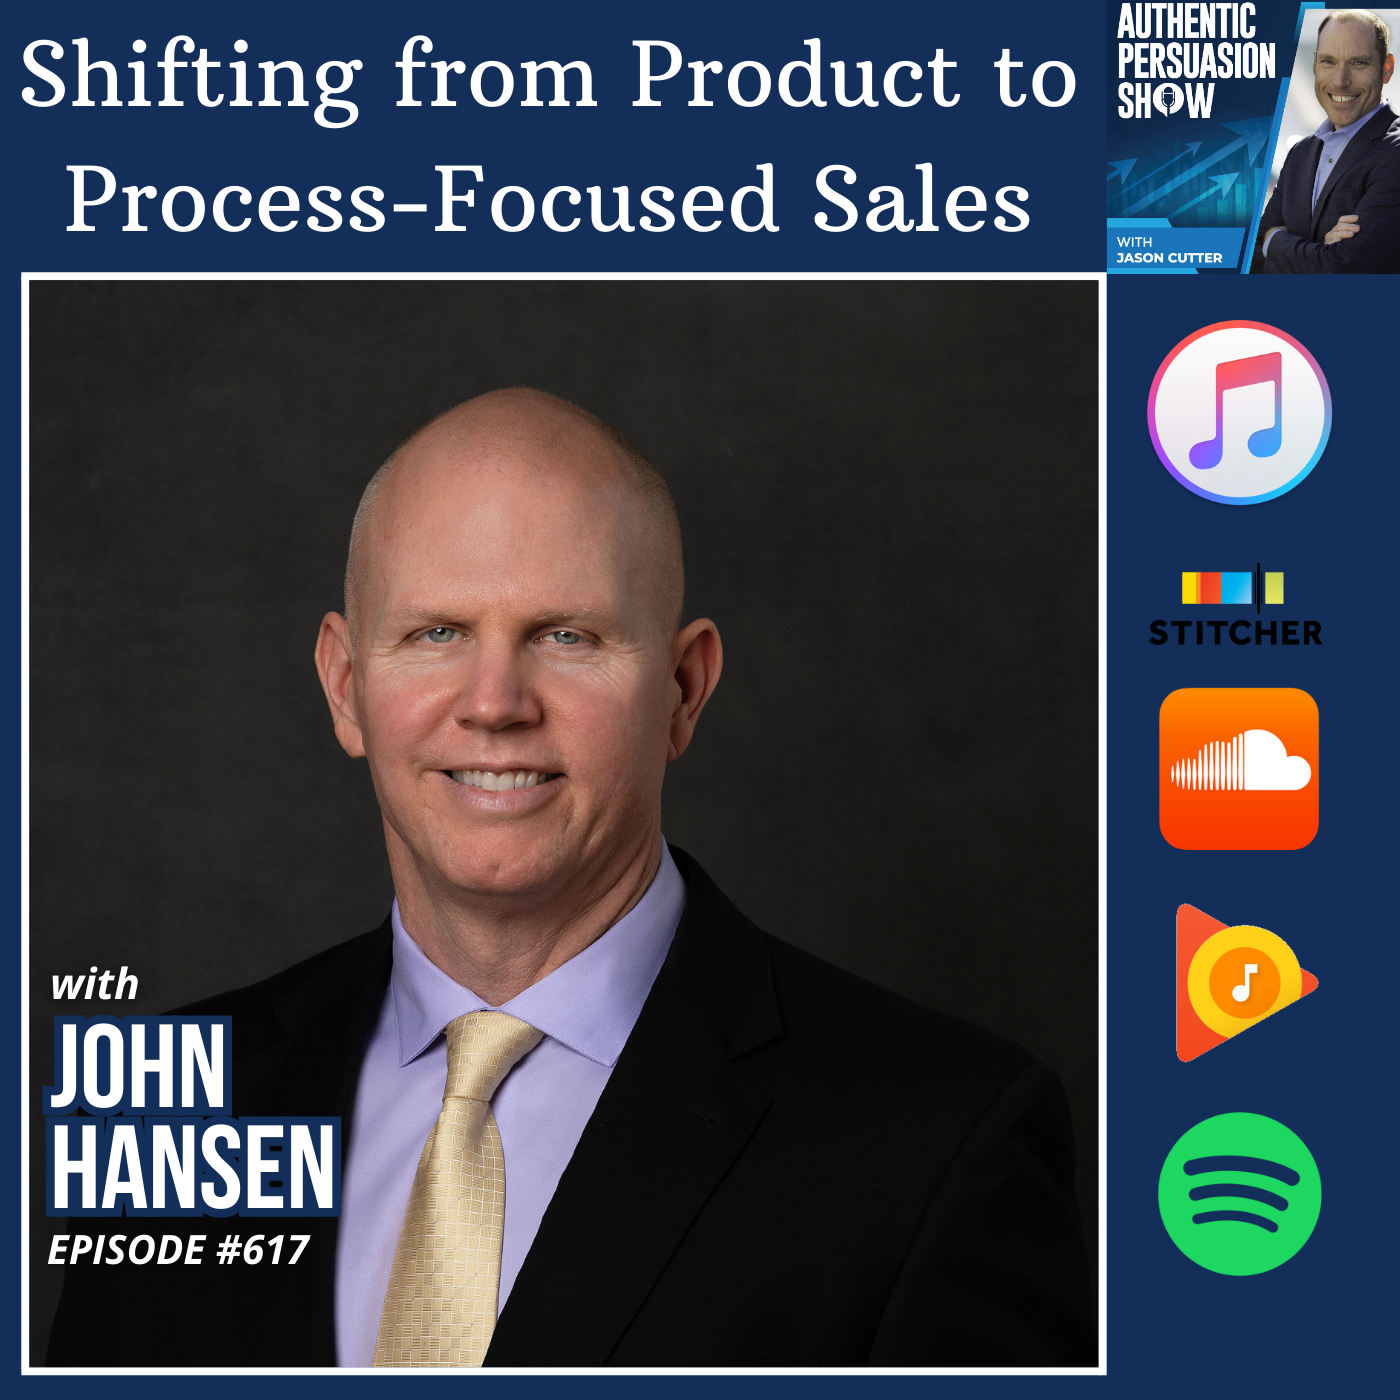 [617] Shifting from Product to Process Focused Sales, with Dr. John Hansen from the University of Alabama, Birmingham